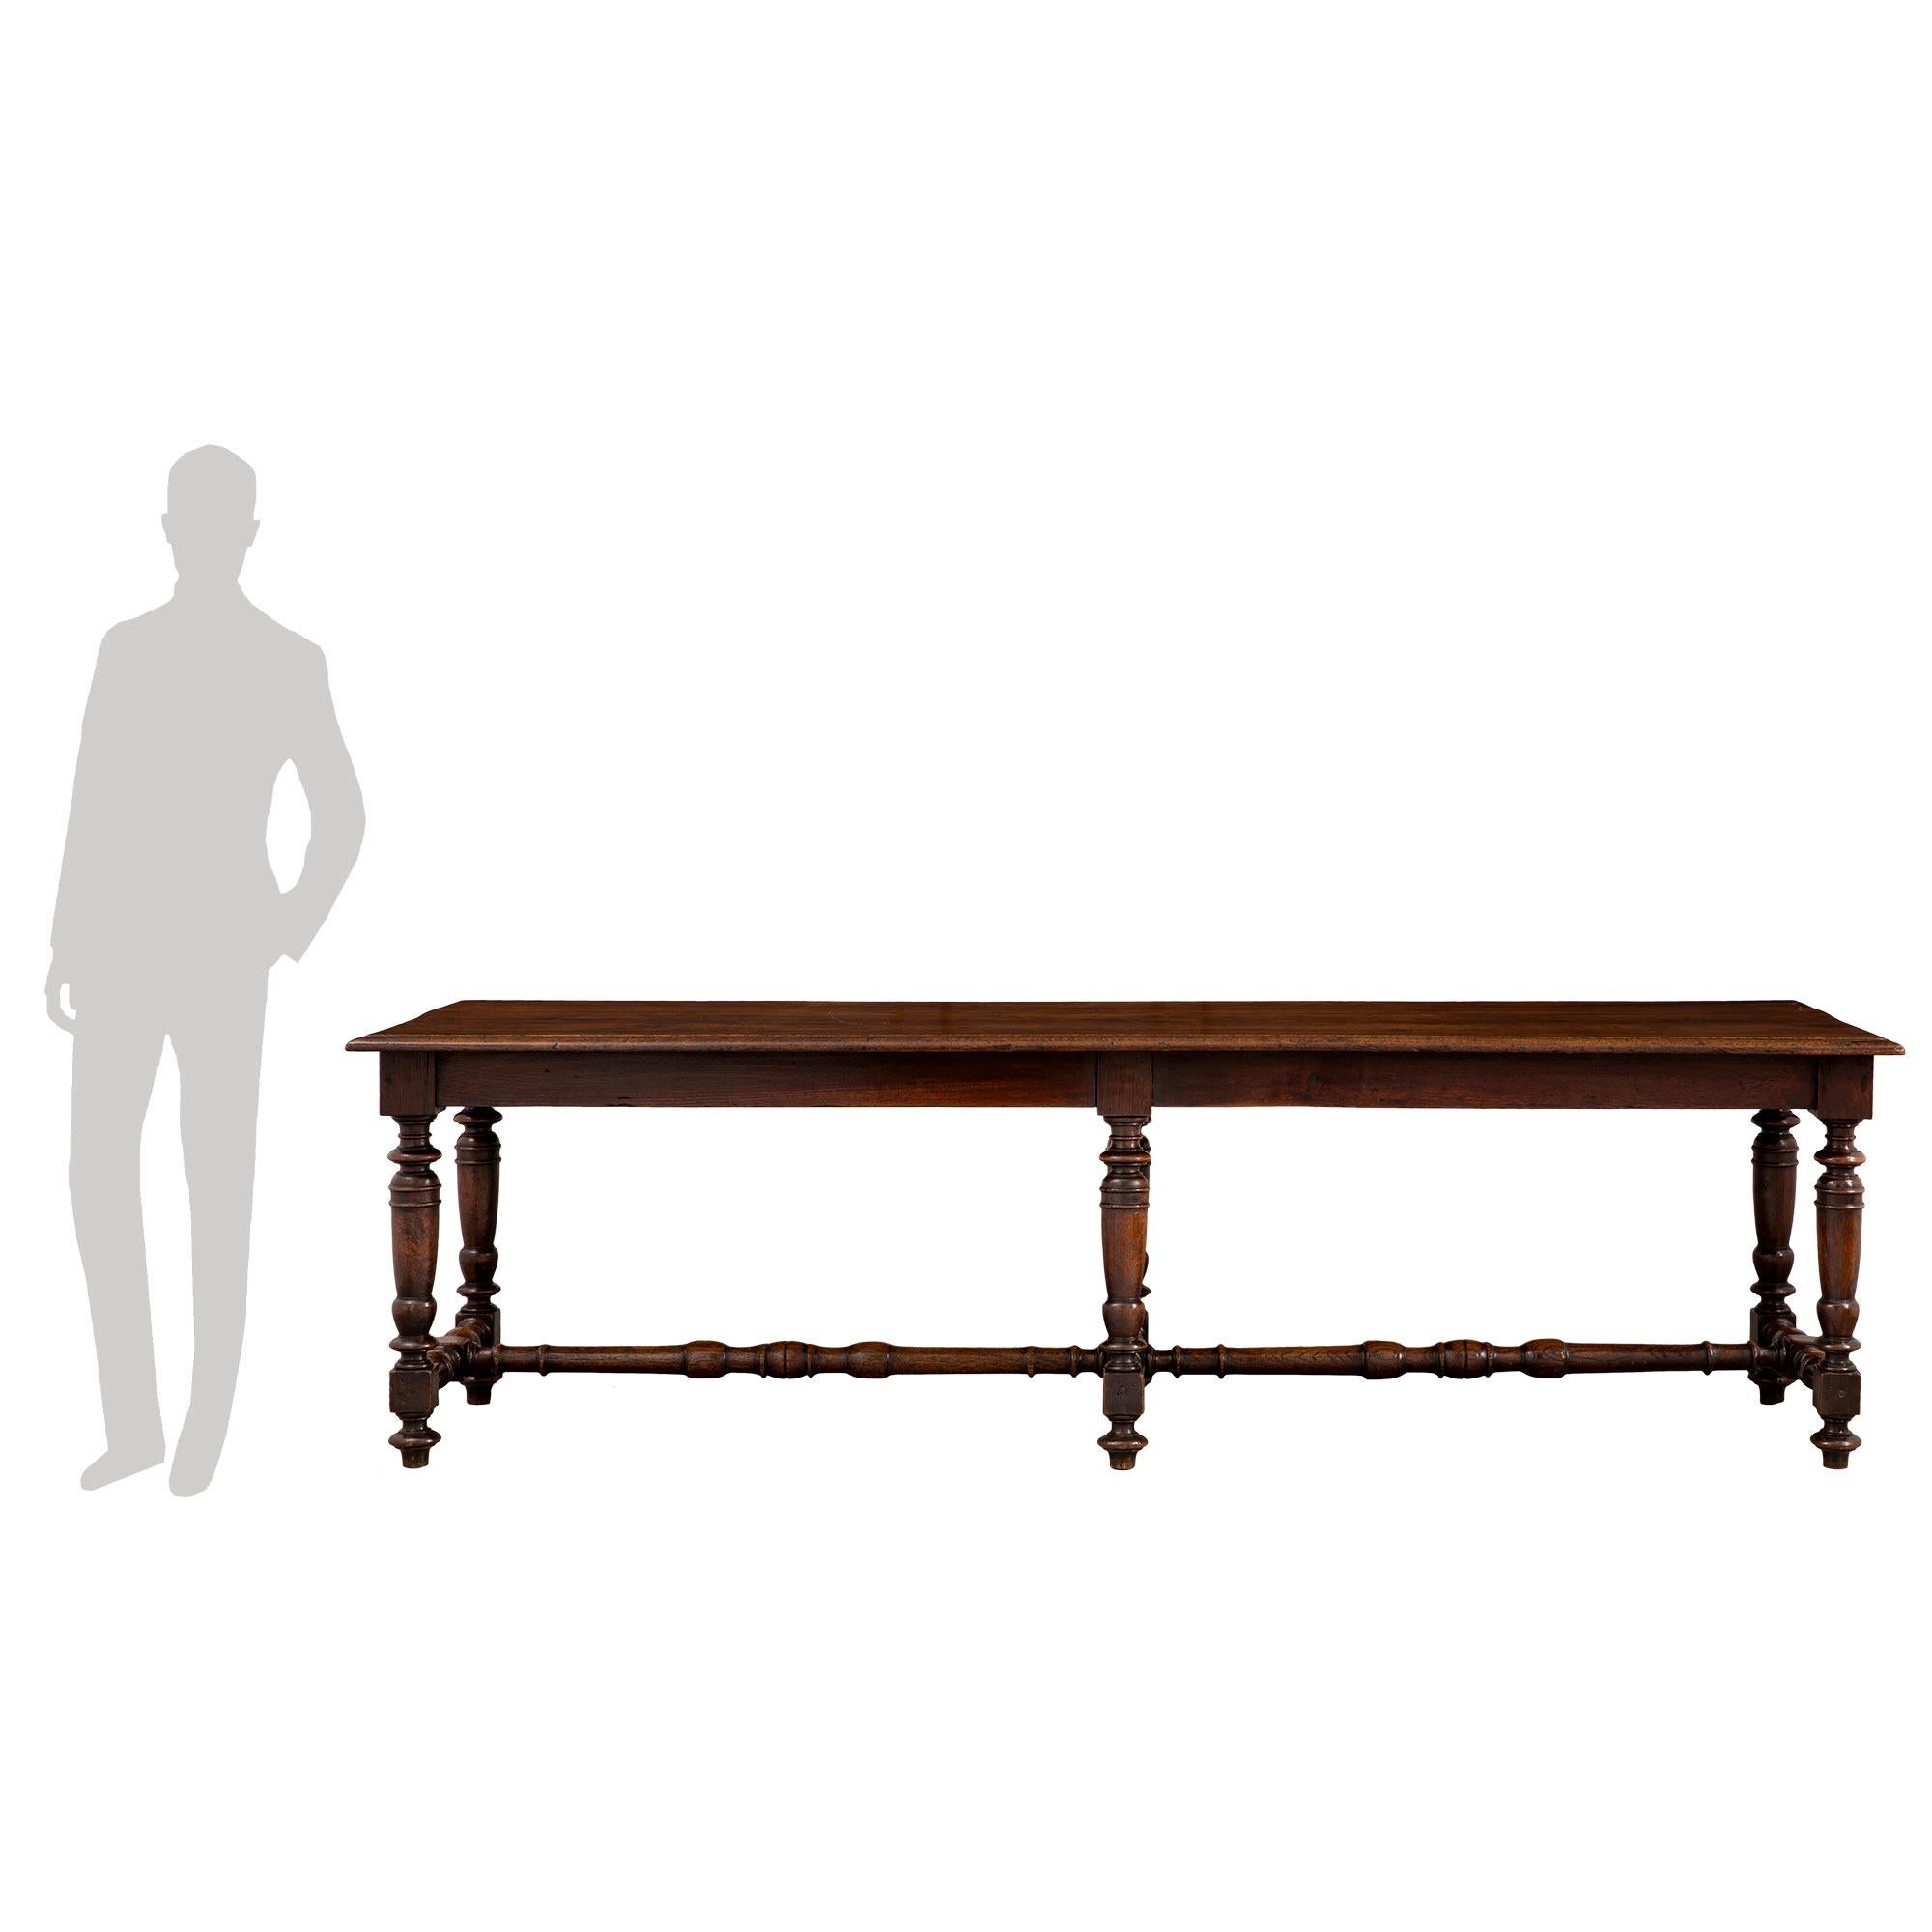 A handsome Country French 19th century Louis XIII style oak dining/center table. The table is raised by six elegant turned legs with topie shaped feet and striking block reserves which are each connected by a lovely turned stretcher. Above the